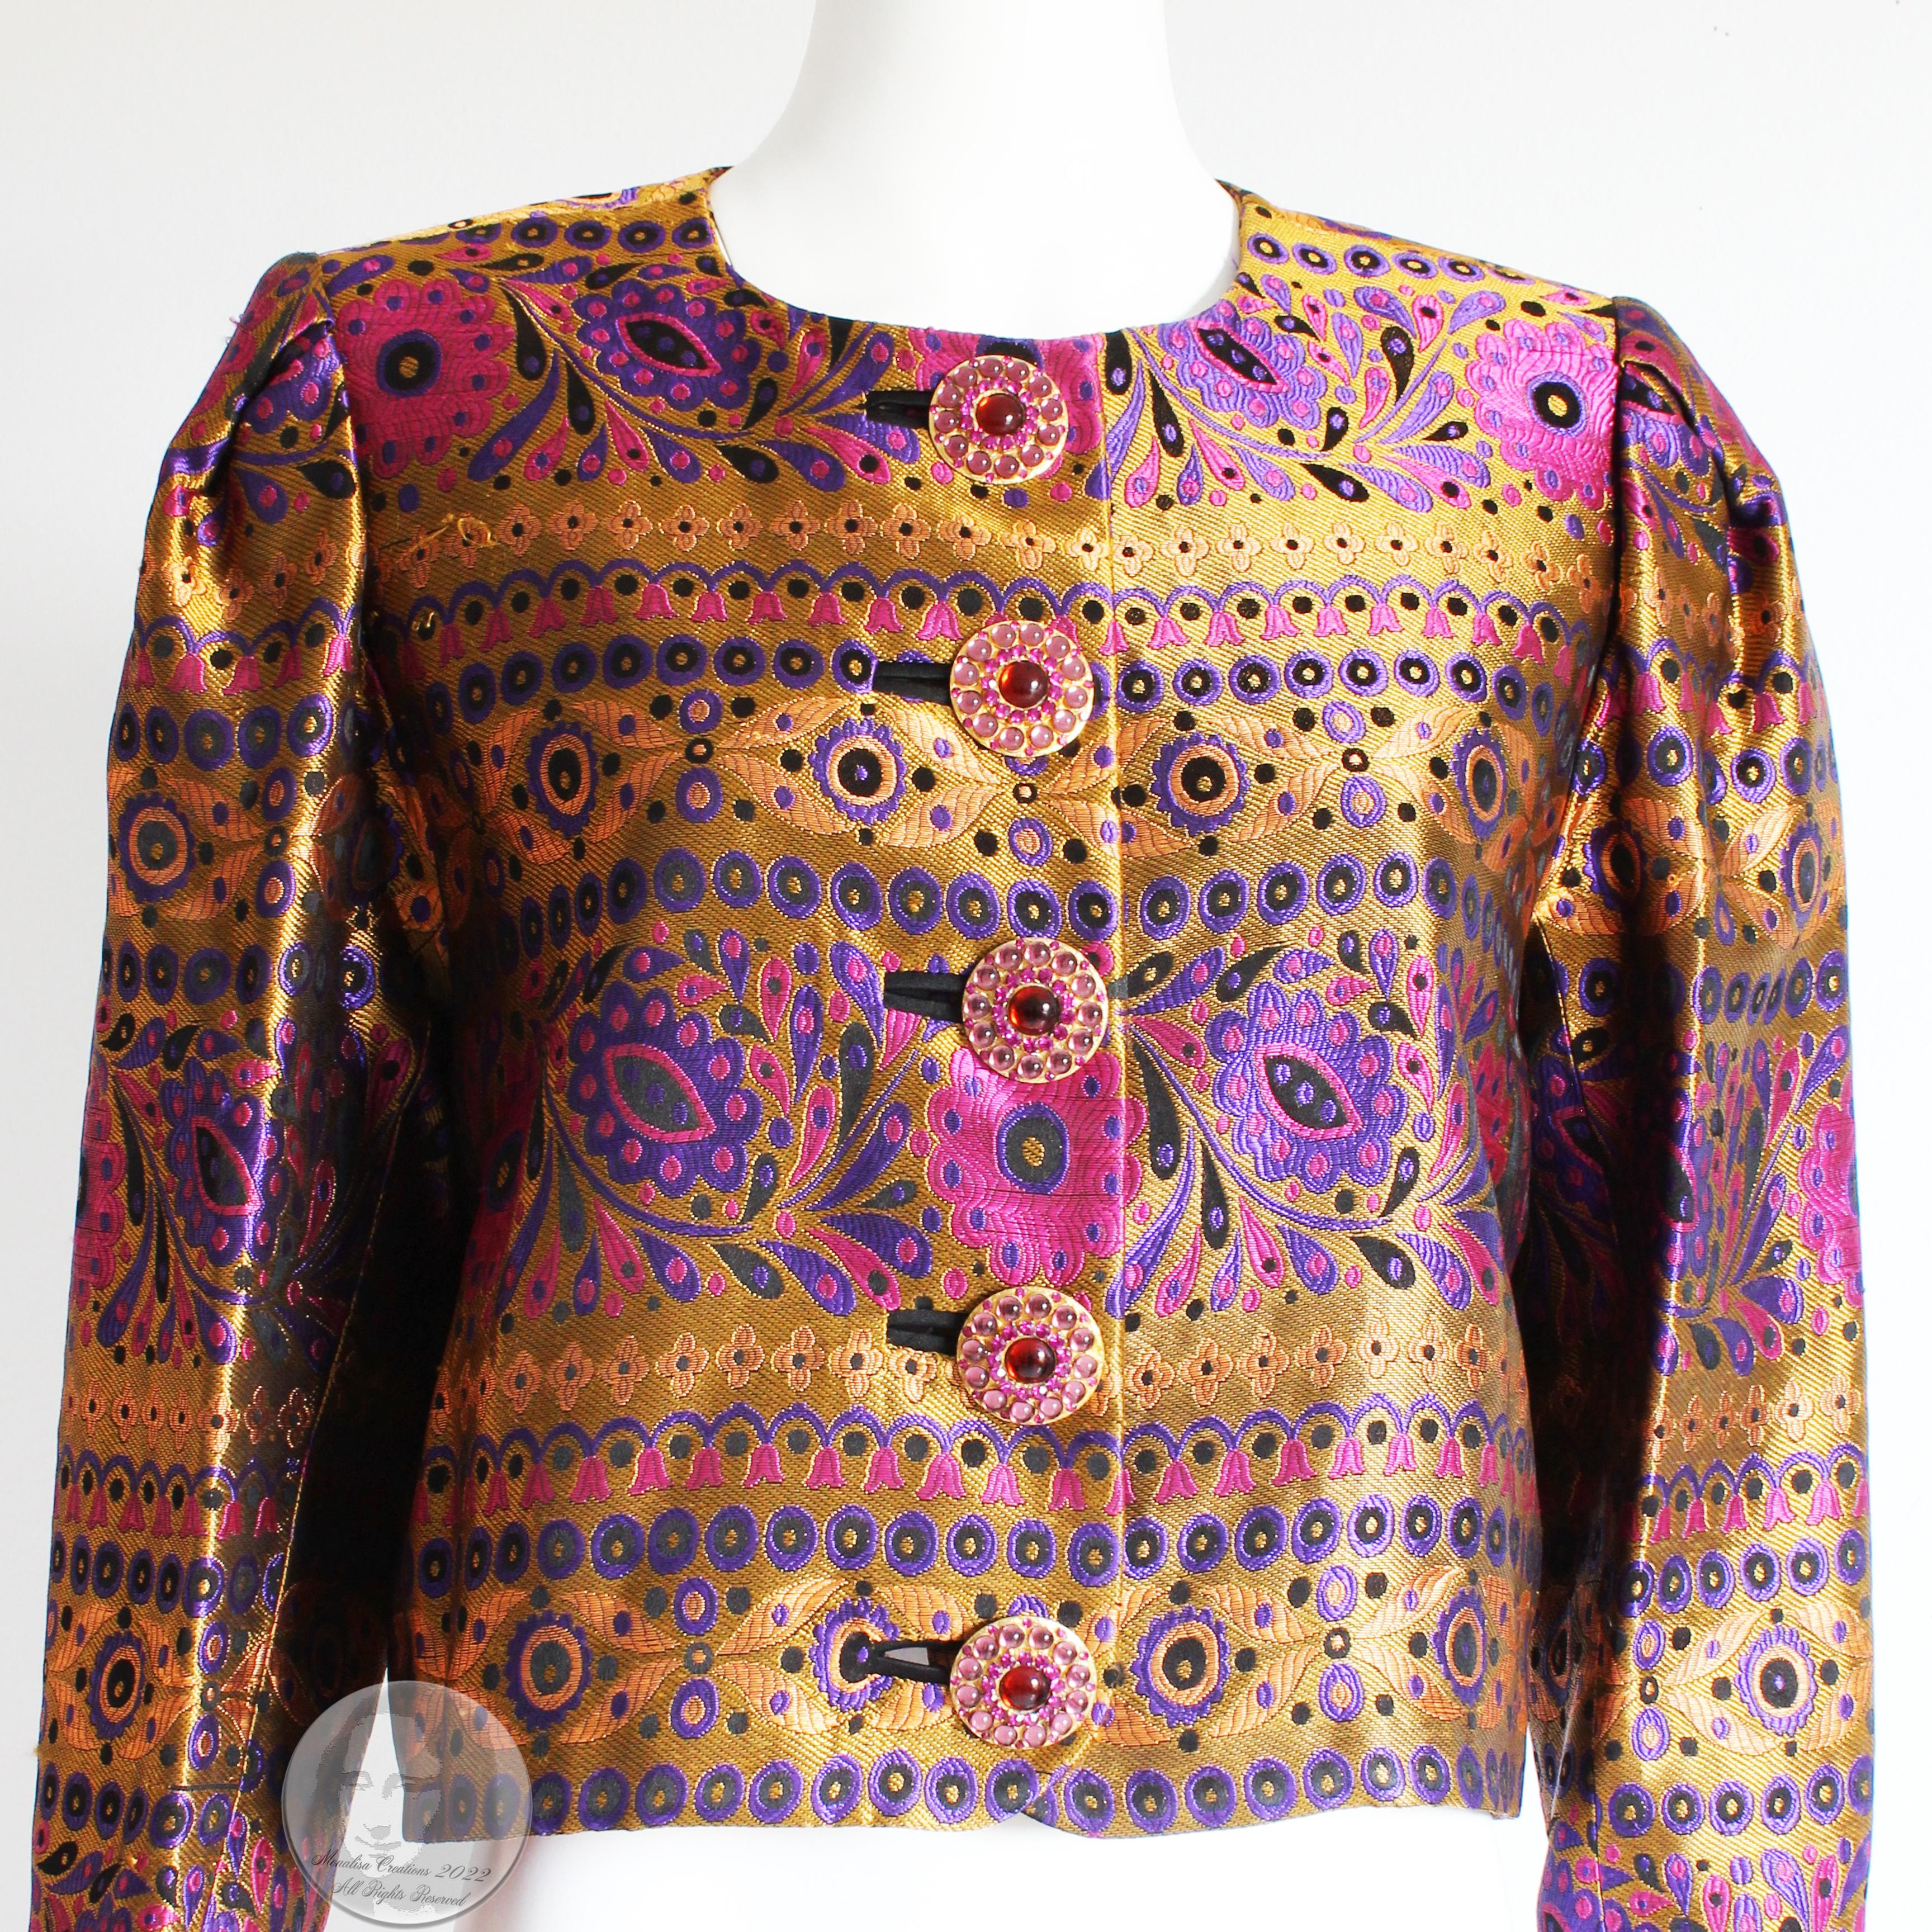 An incredible vintage jacket by Yves Saint Laurent from the F/W 1991 collection.  Made from what we believe is silk (no content label), this fabulous jacket features a gorgeous floral brocade in shades of gold, lilac, black and pink and fastens with